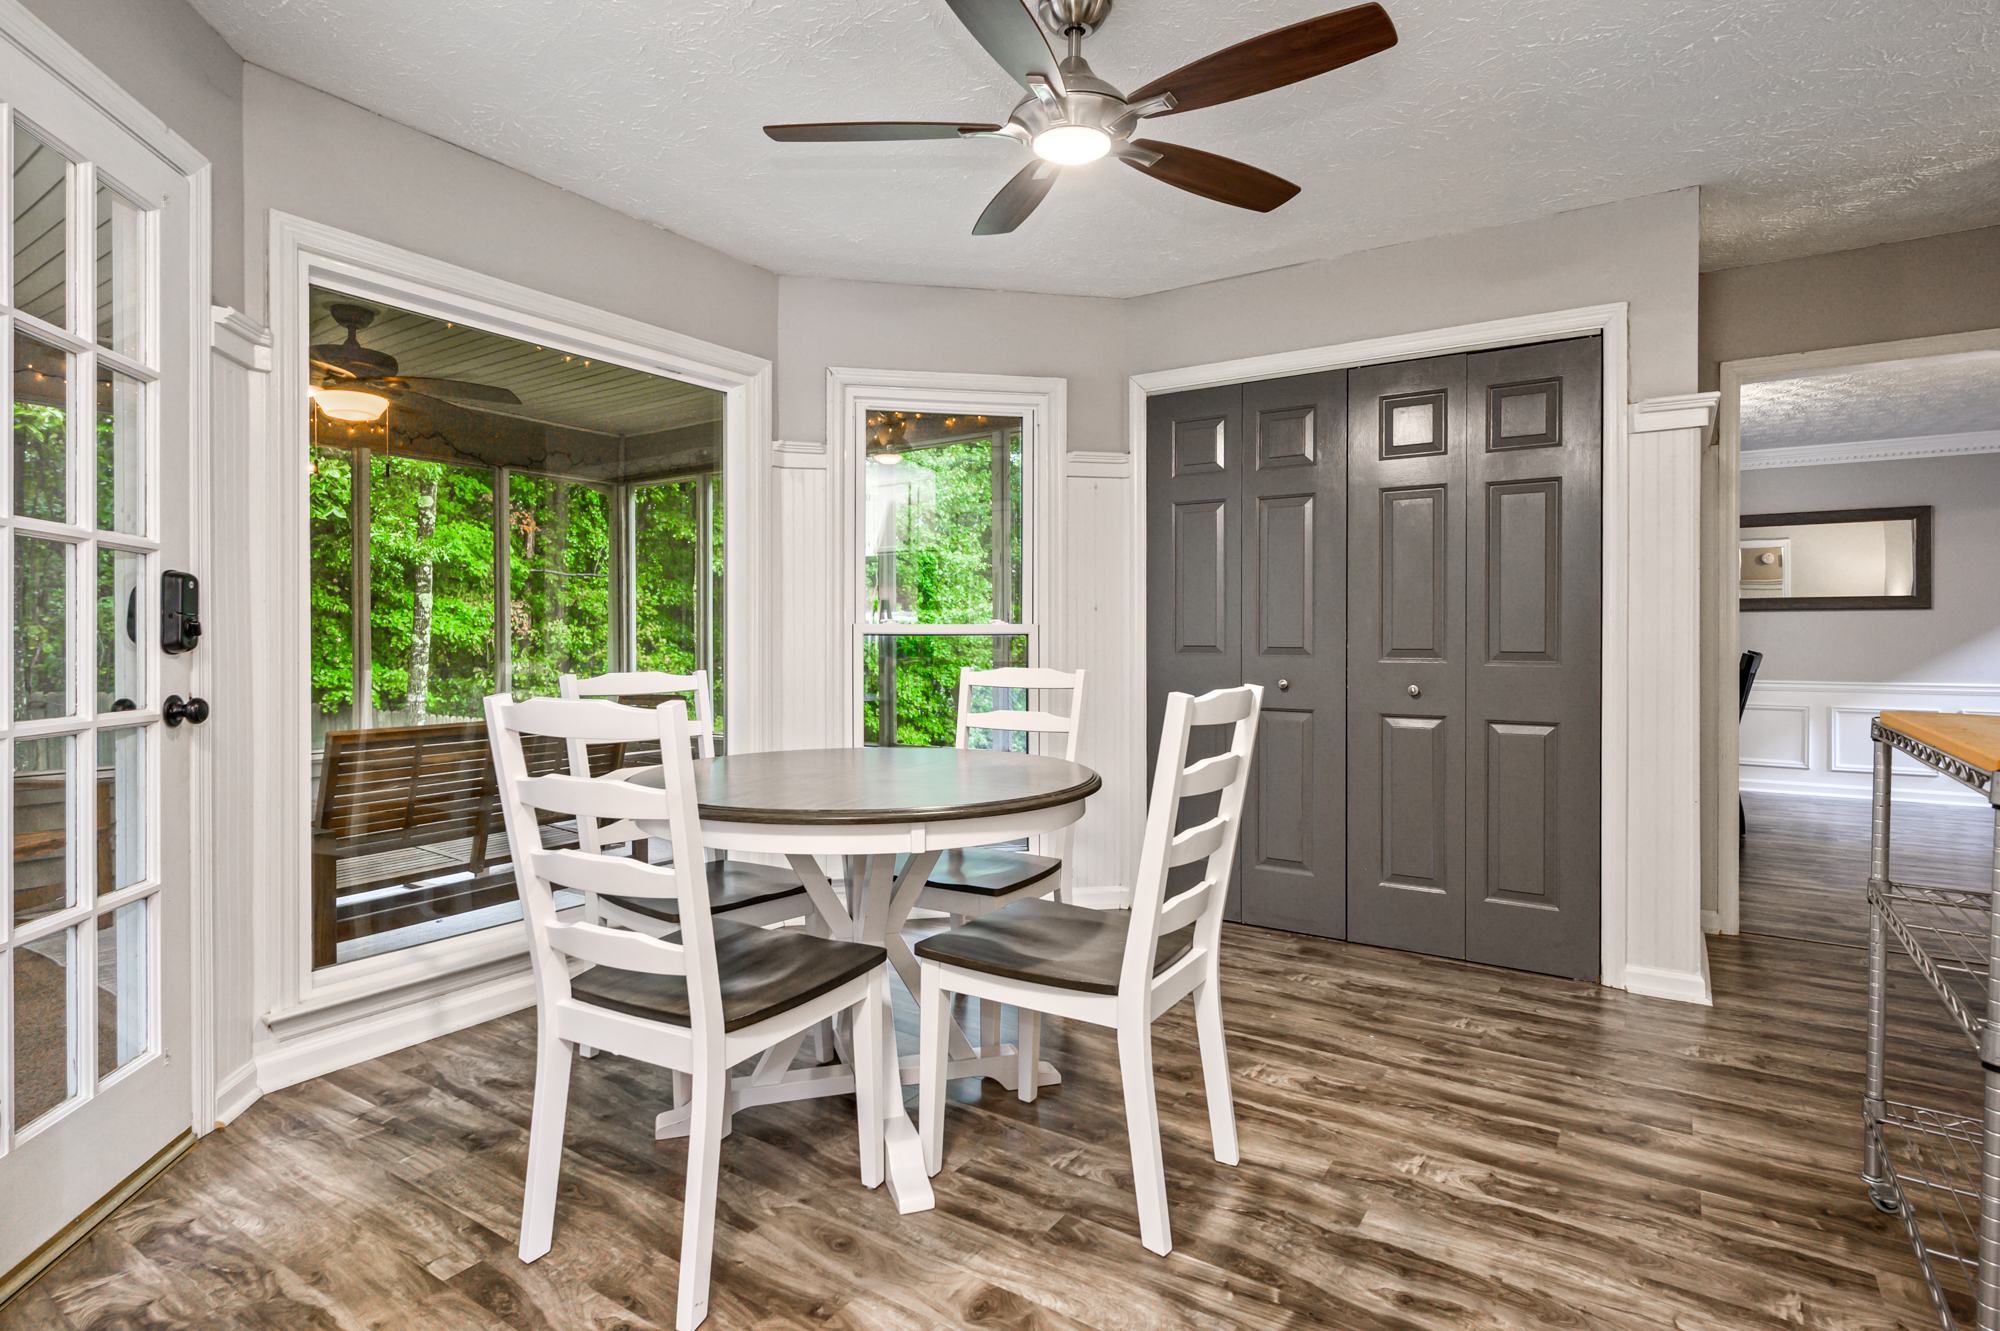 Relax In This 4BR Retreat With Screened Cozy Porch